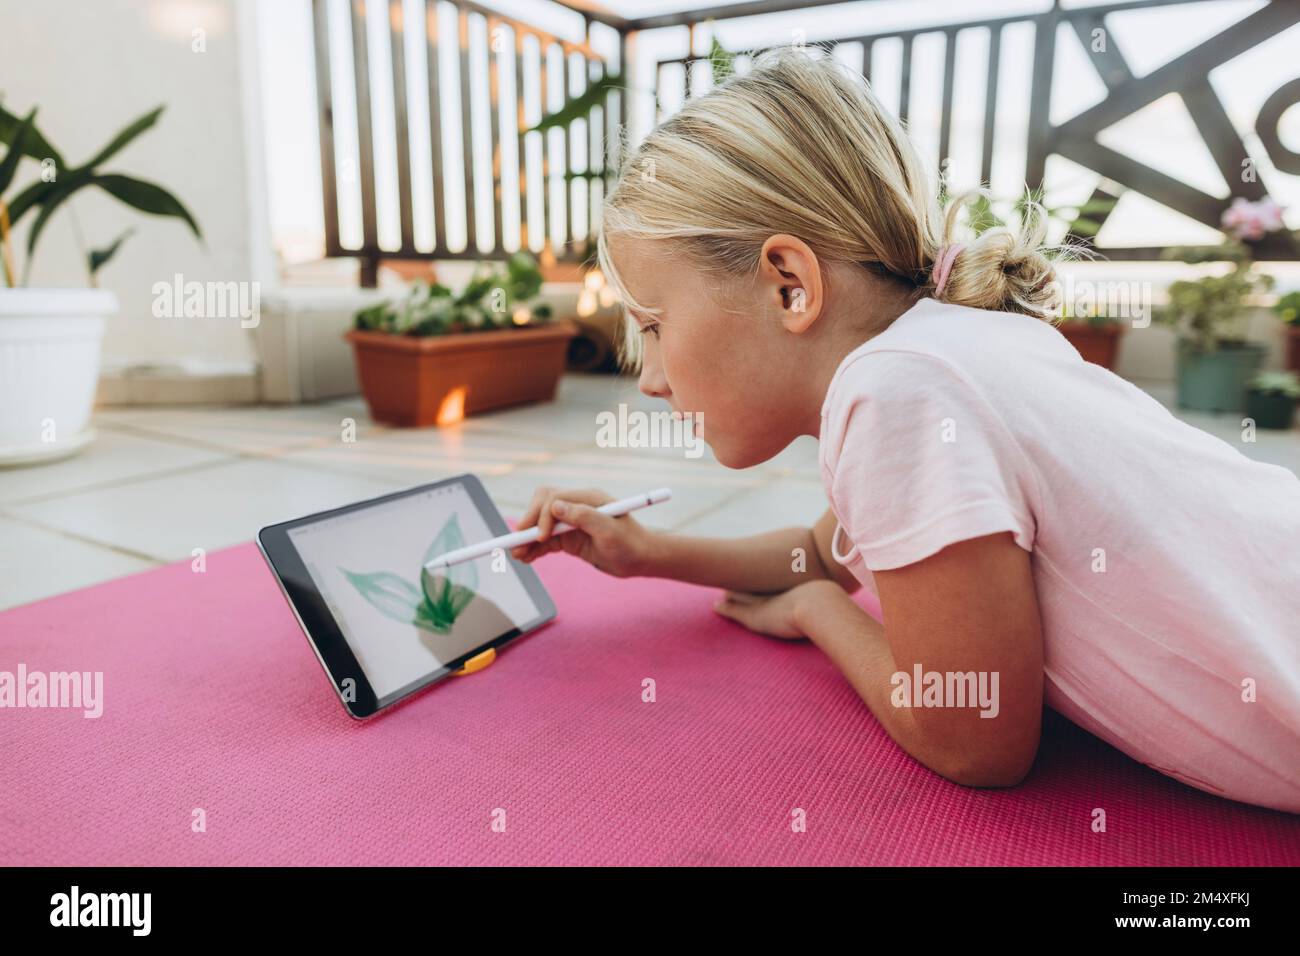 Girl drawing leaf on a tablet with digitized pen Stock Photo